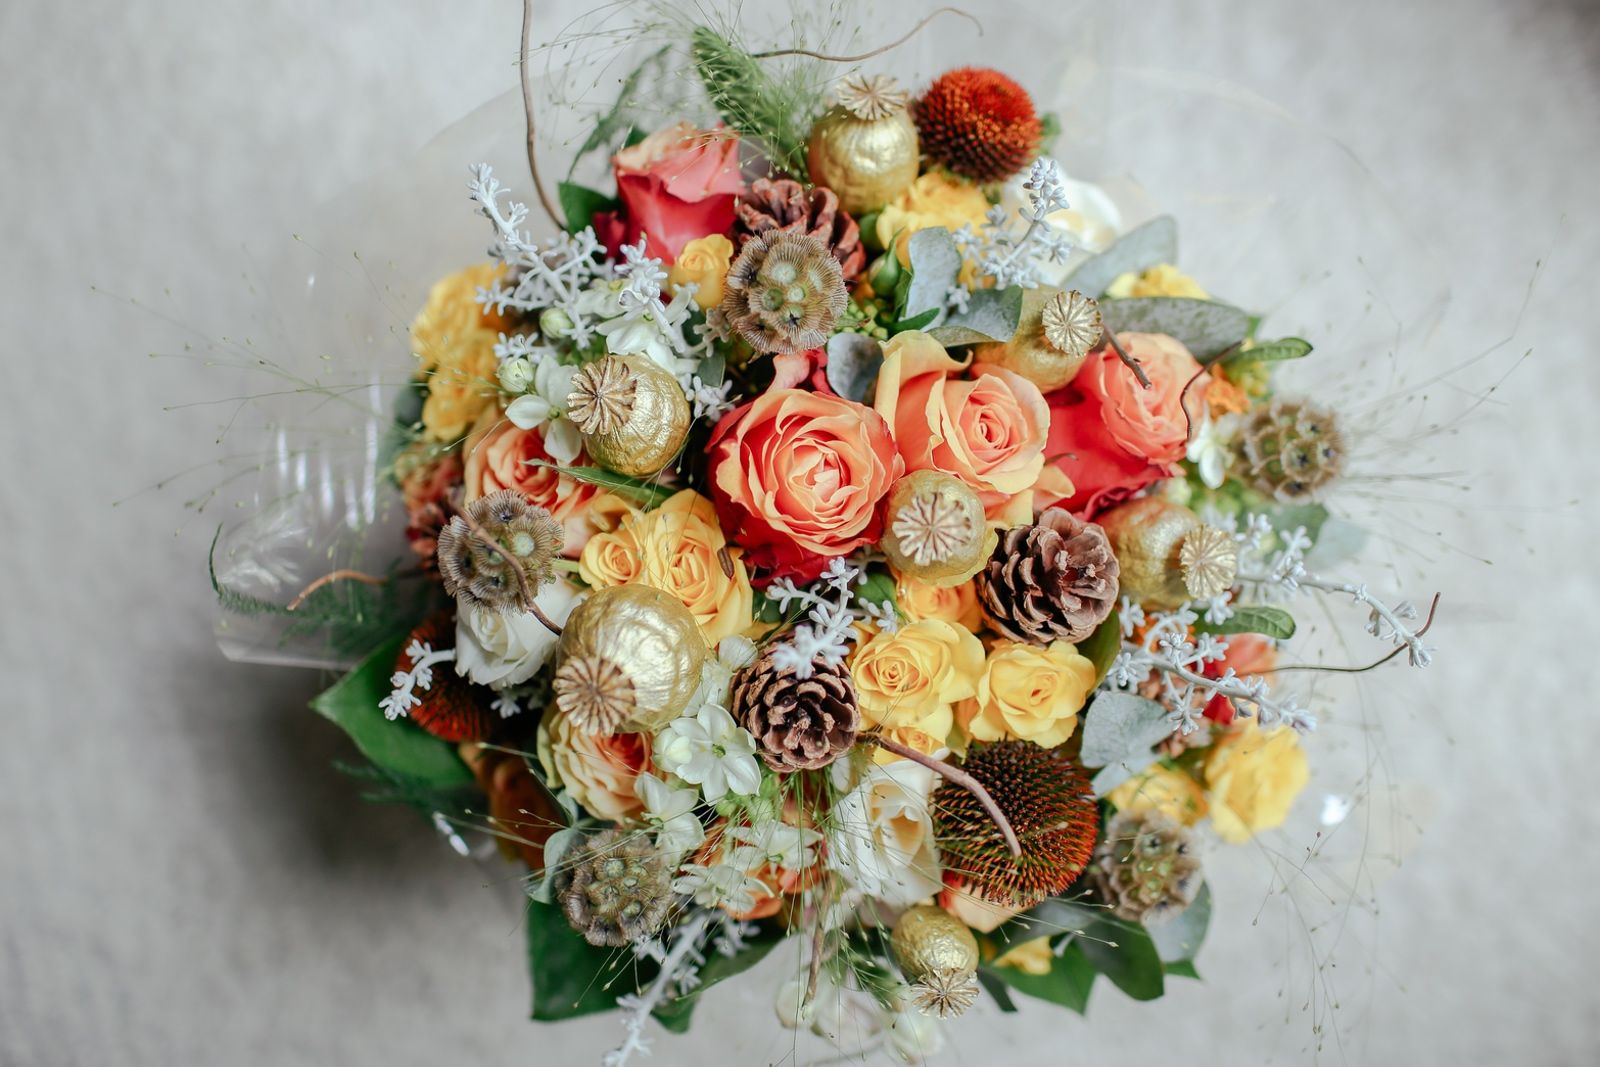 Best UK flower delivery services 2021: Get gorgeous blooms photo 4